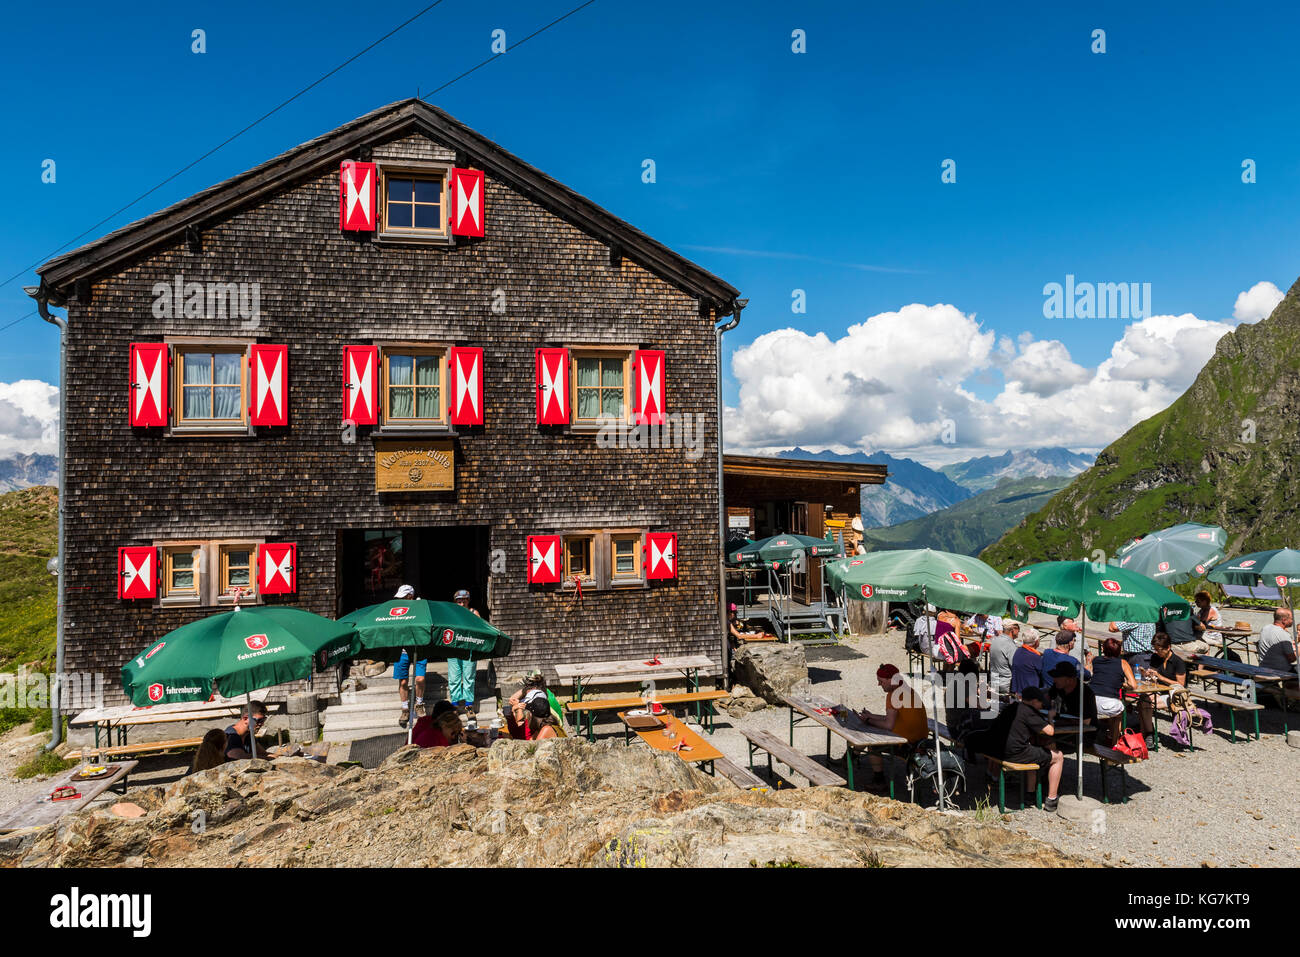 Tschaguns, Austria - July 17, 2017: People and hikers at the Wormser Hütte in the Montafon Alps on a summers day at the terrace of the restaurant, Aus Stock Photo